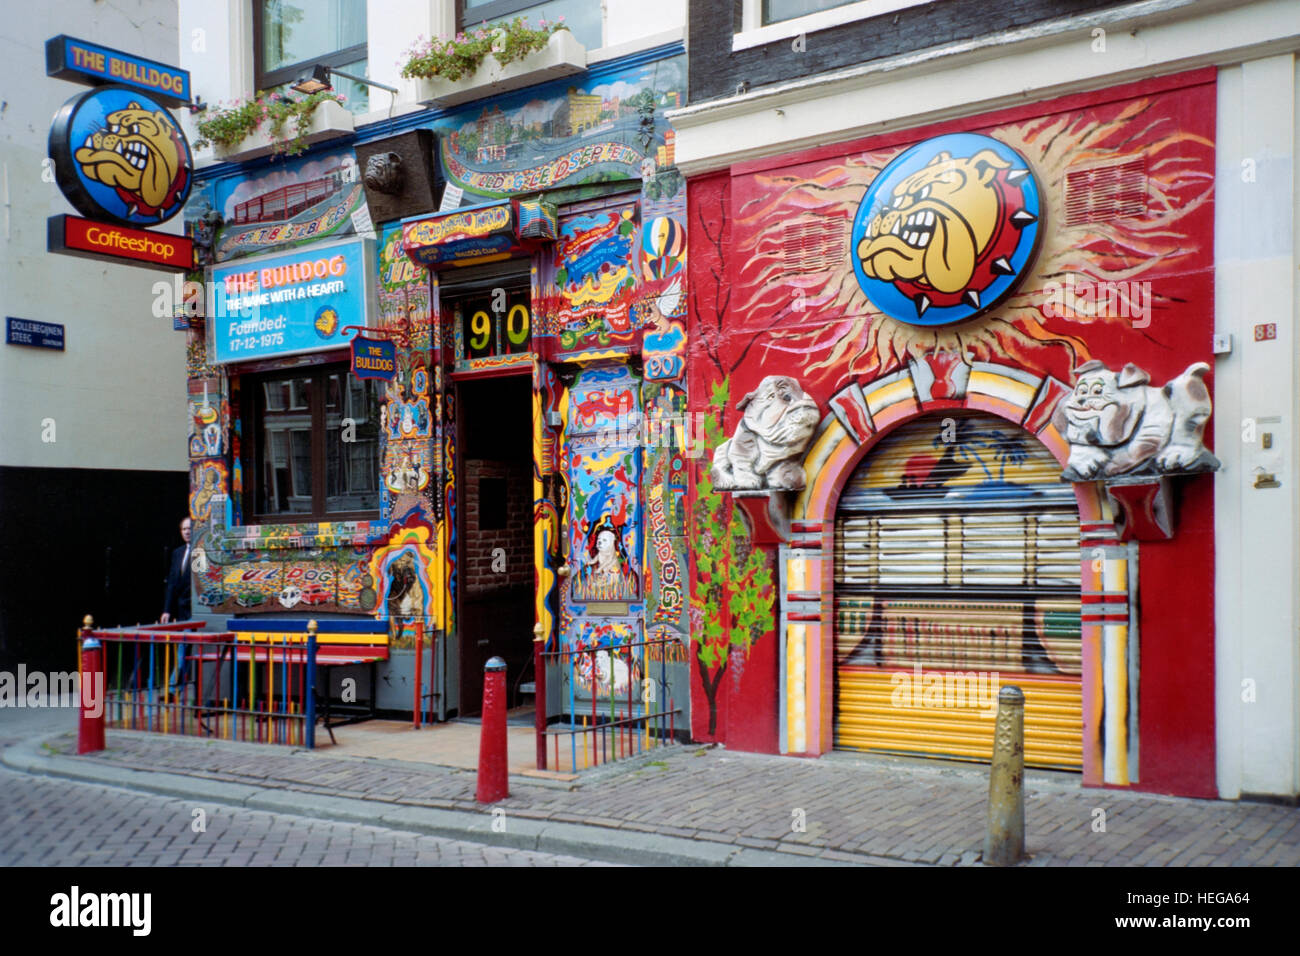 colourful exterior of one of the bulldog cafes in amsterdam holland Stock Photo